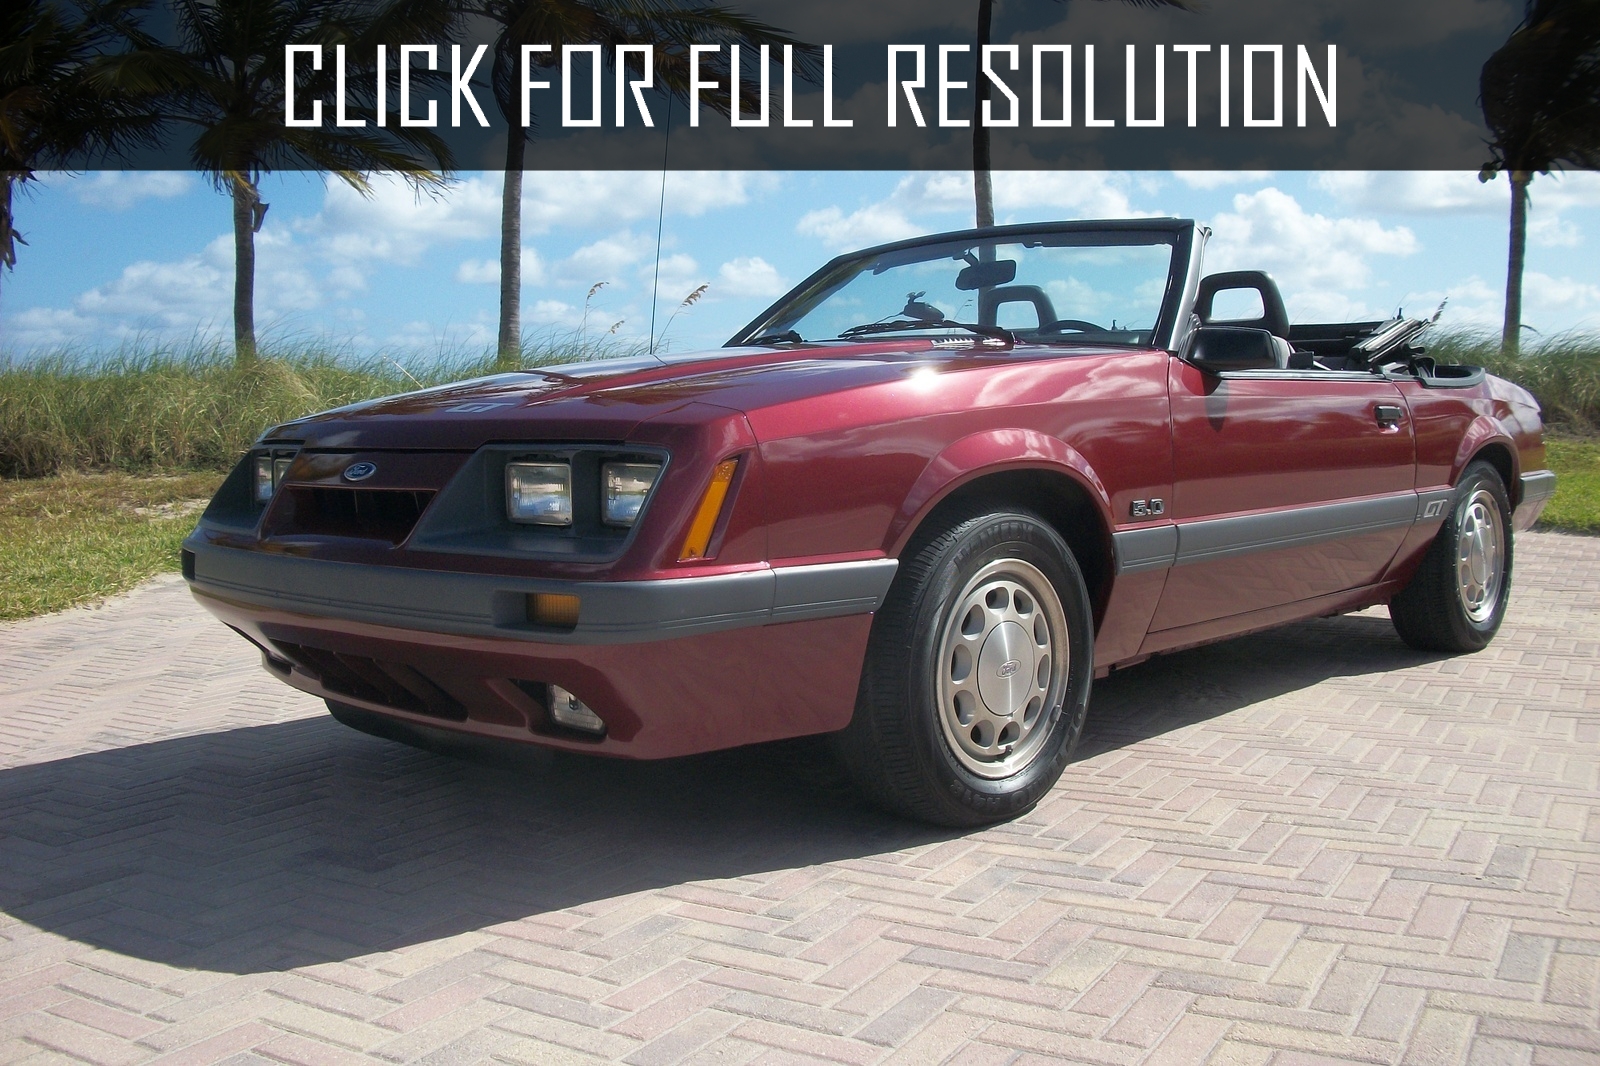 1986 Ford Mustang Gt